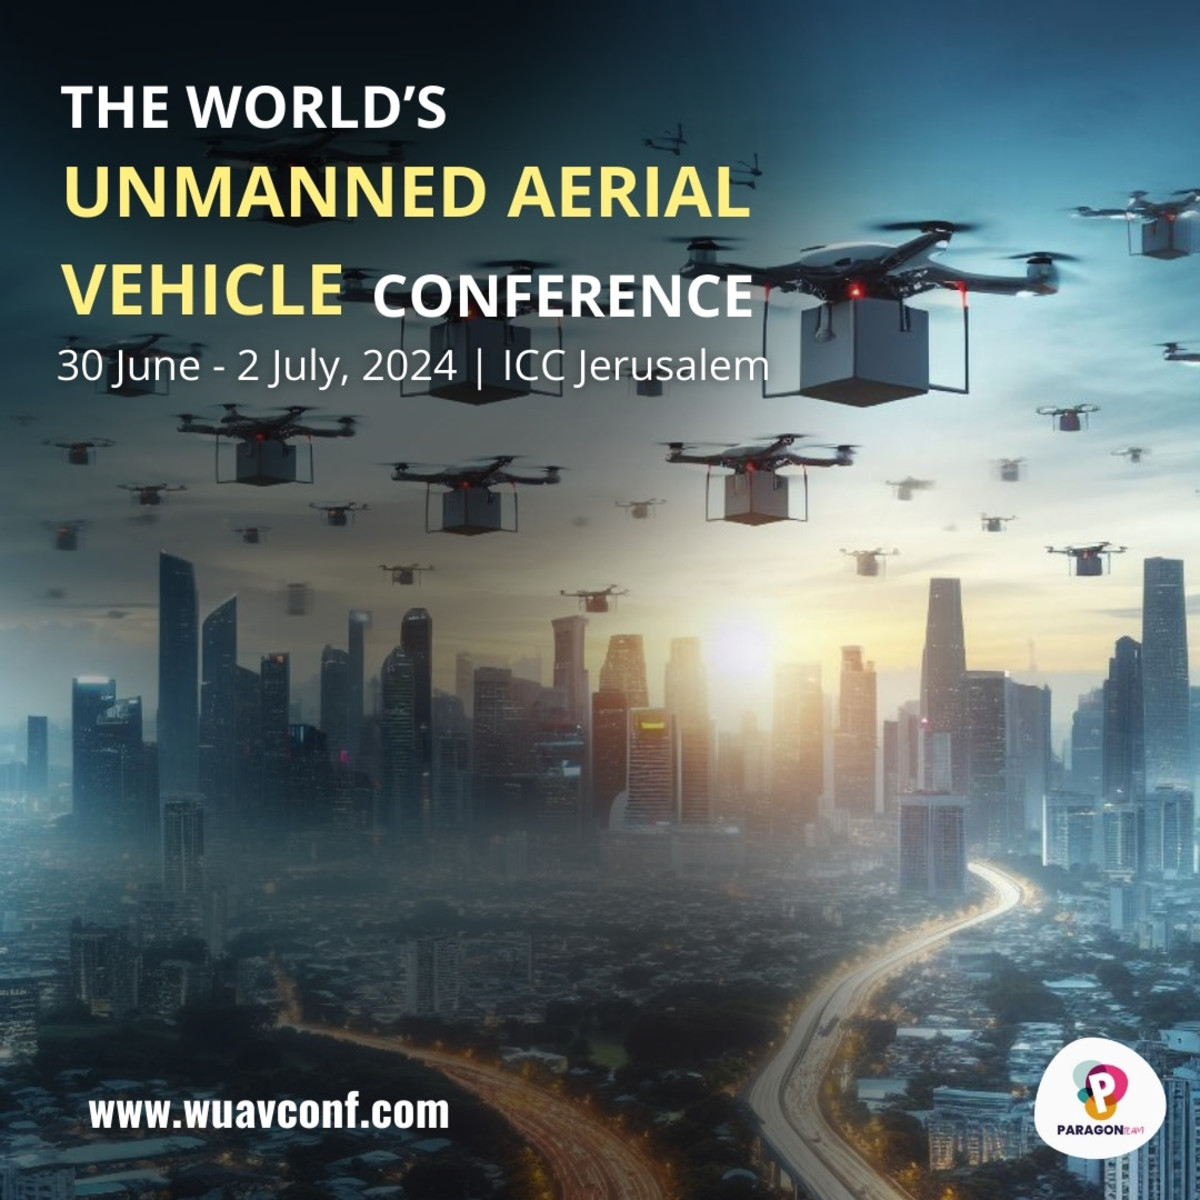 The international conference for unmanned aerial vehicles will open on June 30 in Jerusalem